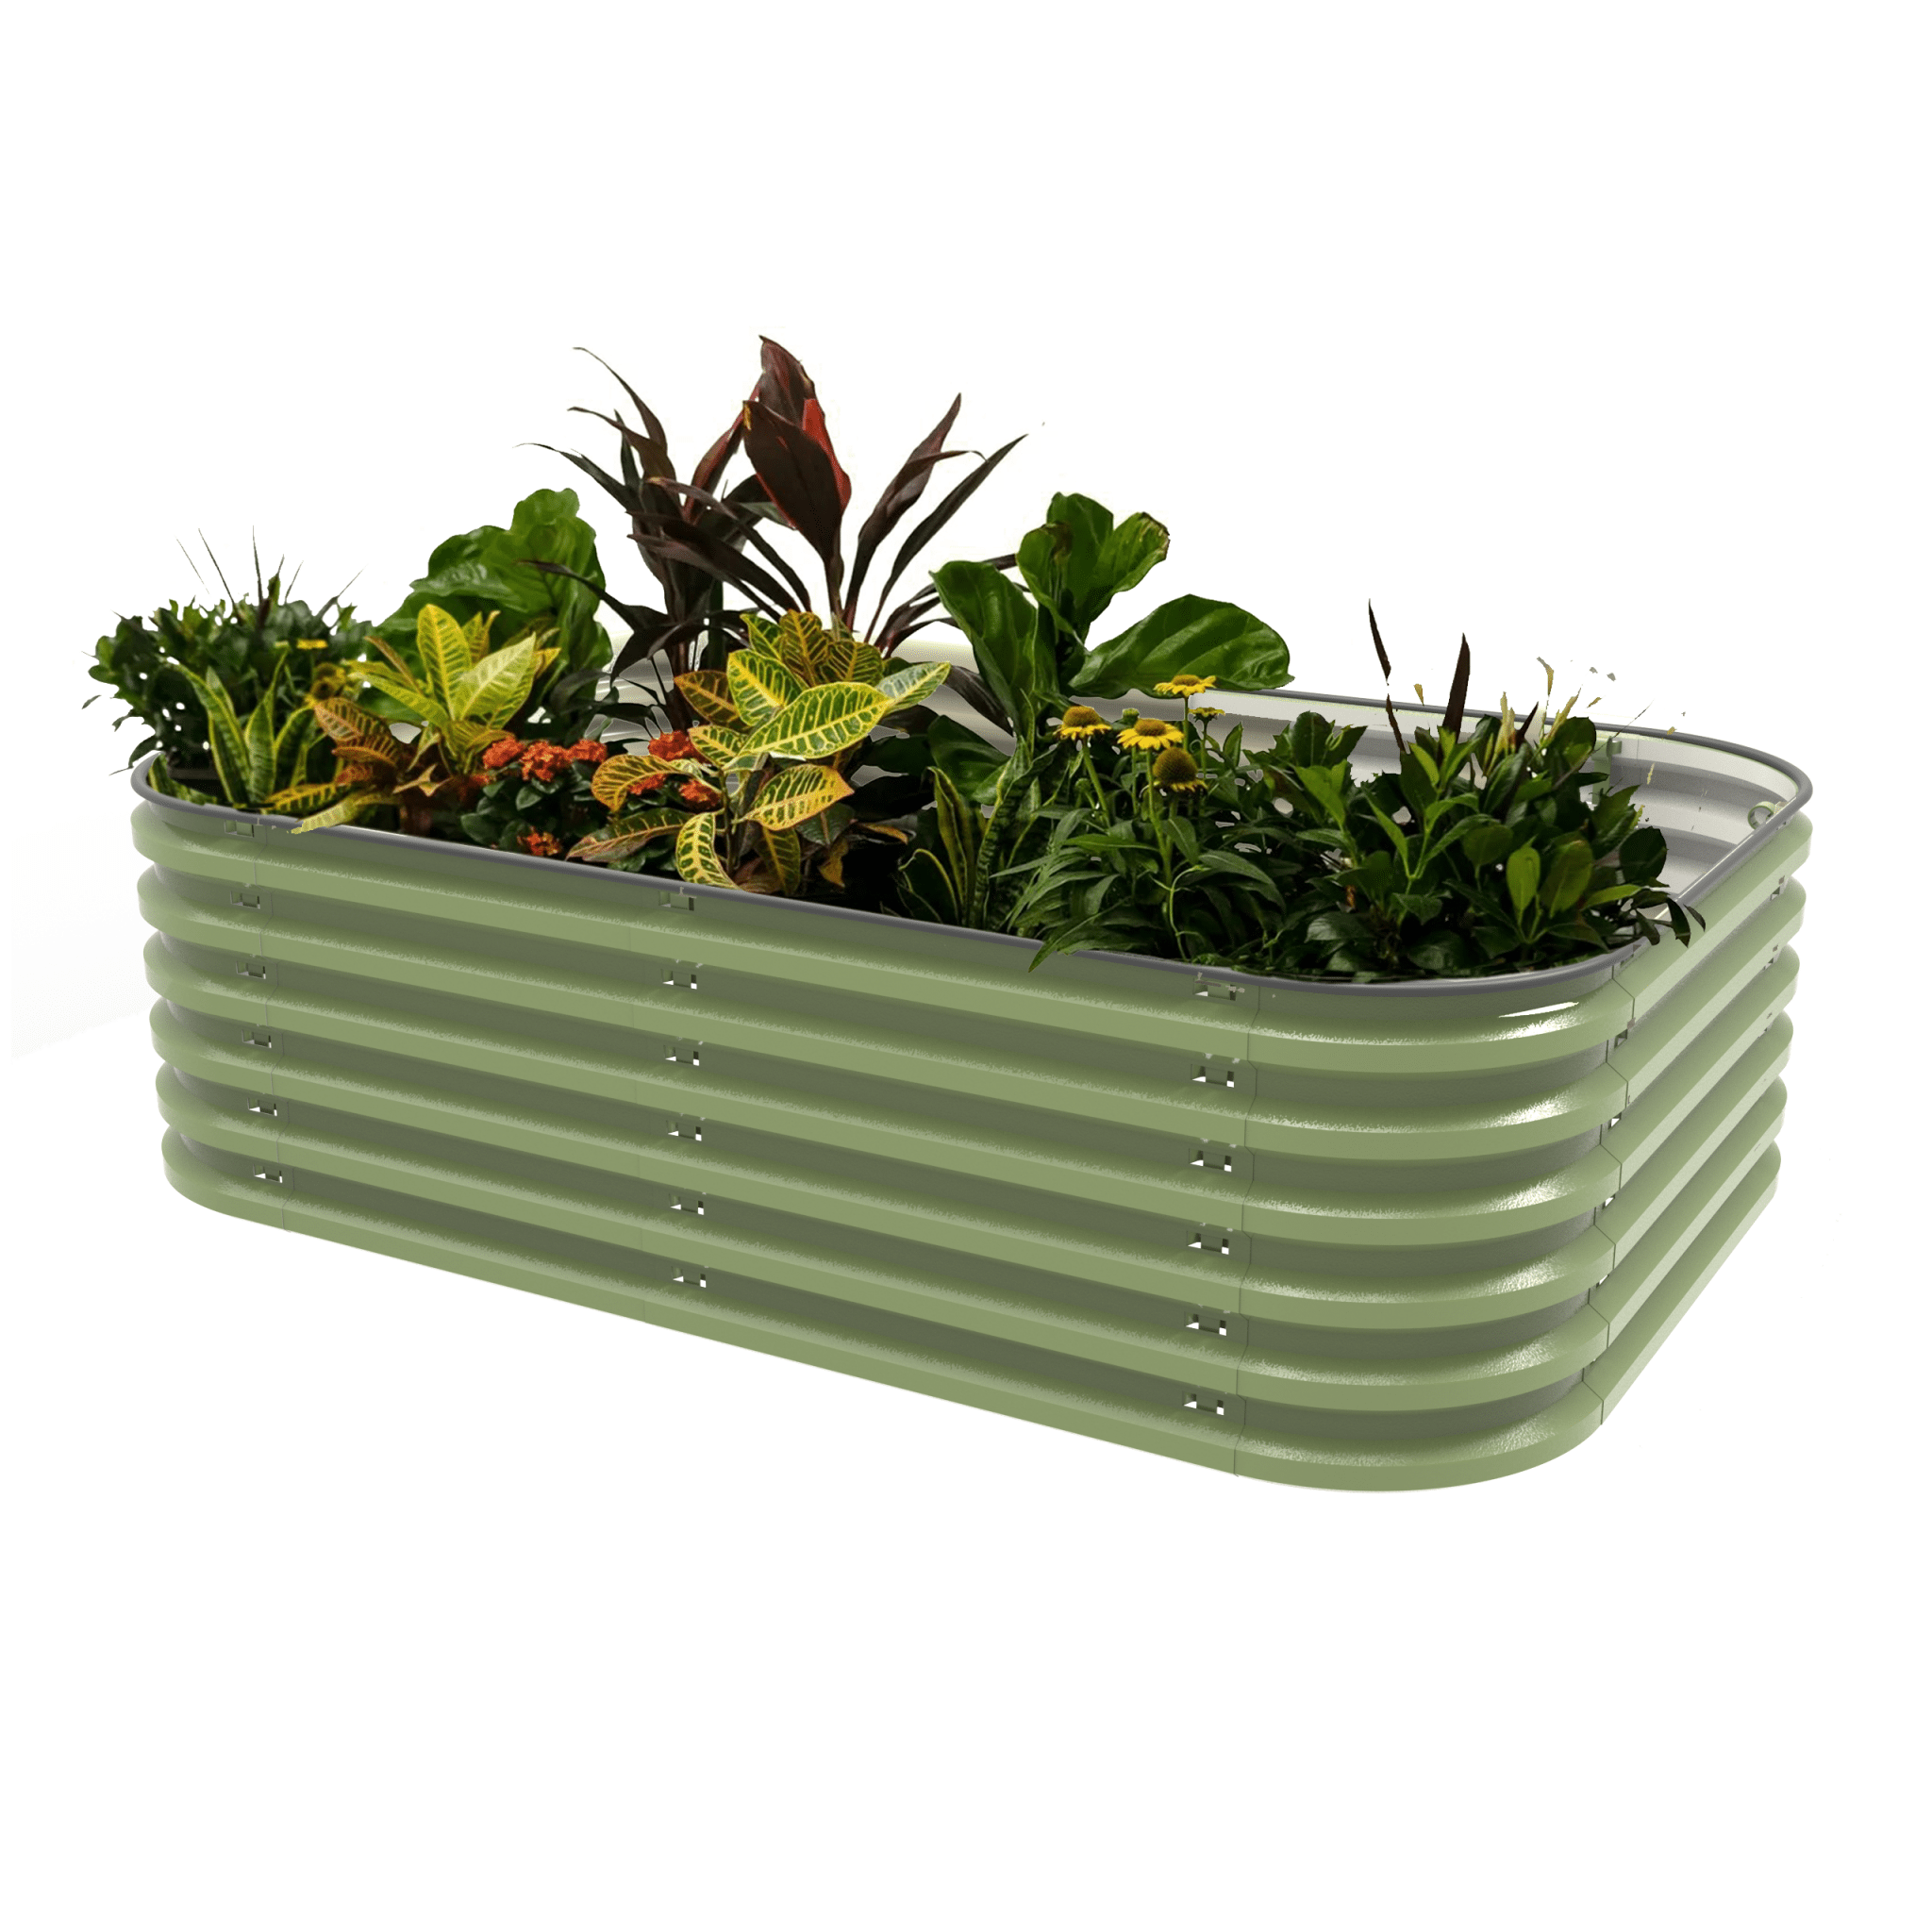 Gro-Rite Metal Raised Garden Bed Kit - Front View with Plants